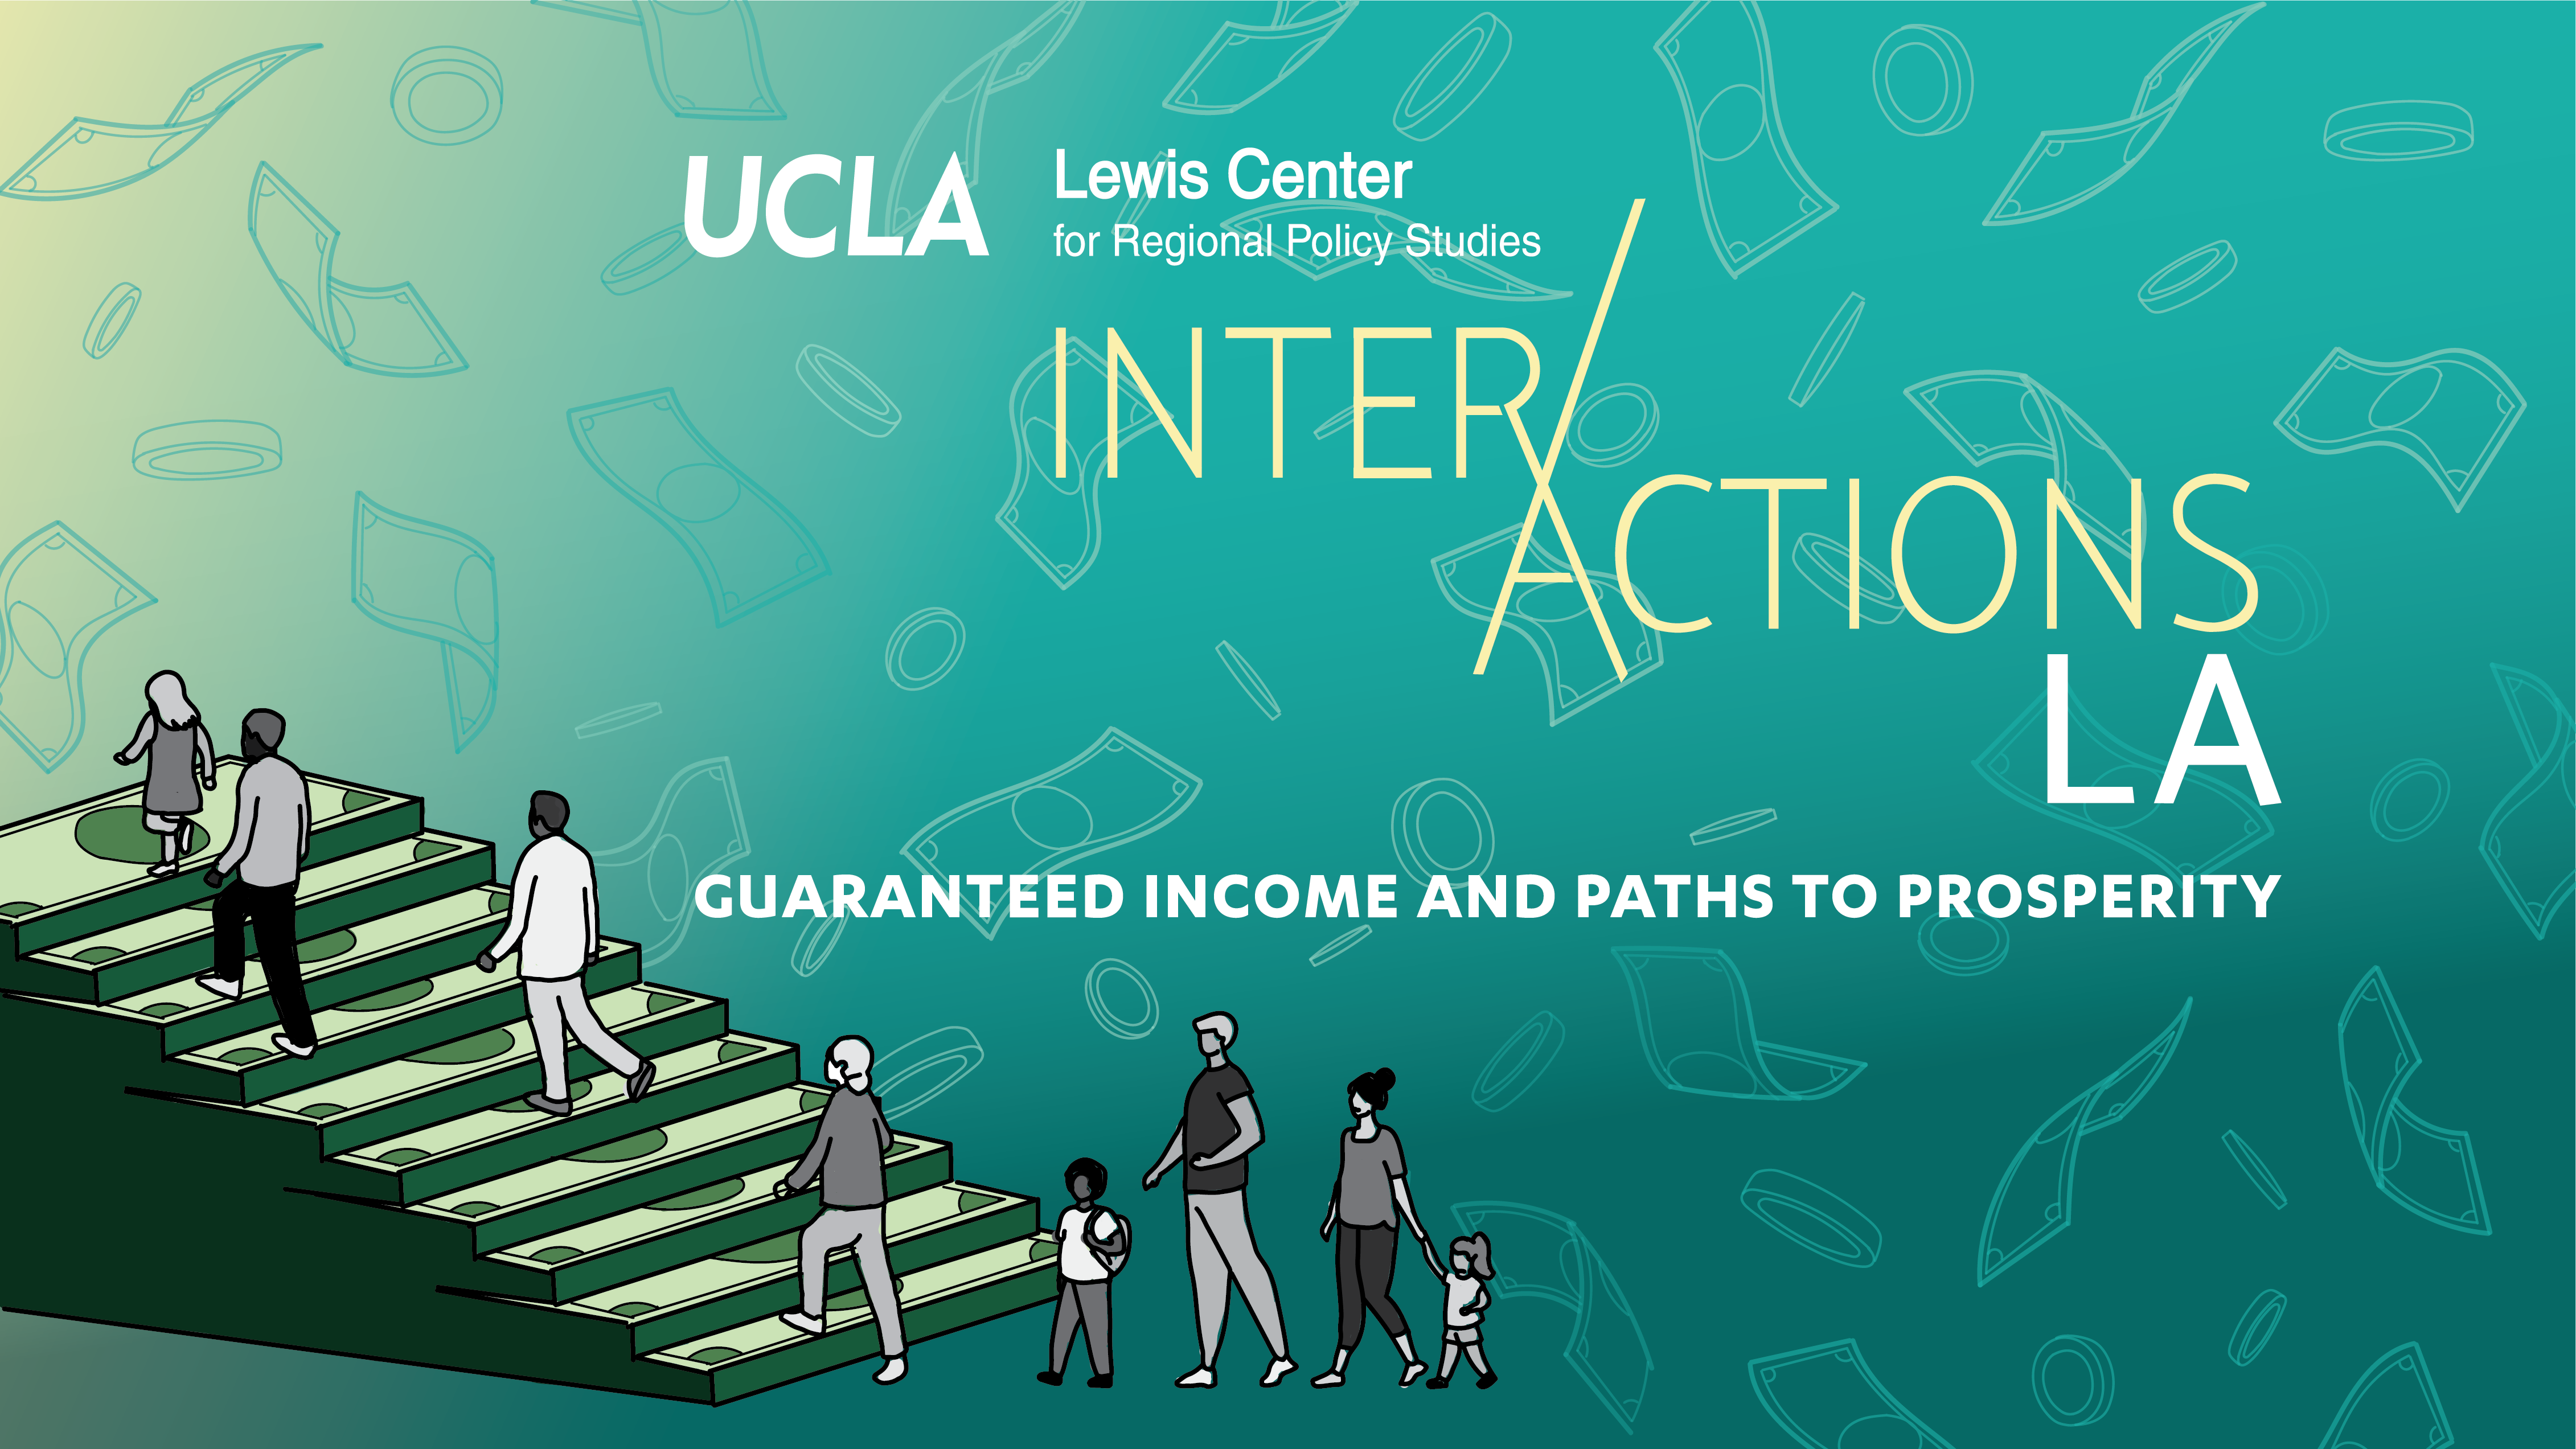 InterActions LA 2021: Guaranteed Income and Paths to Prosperity